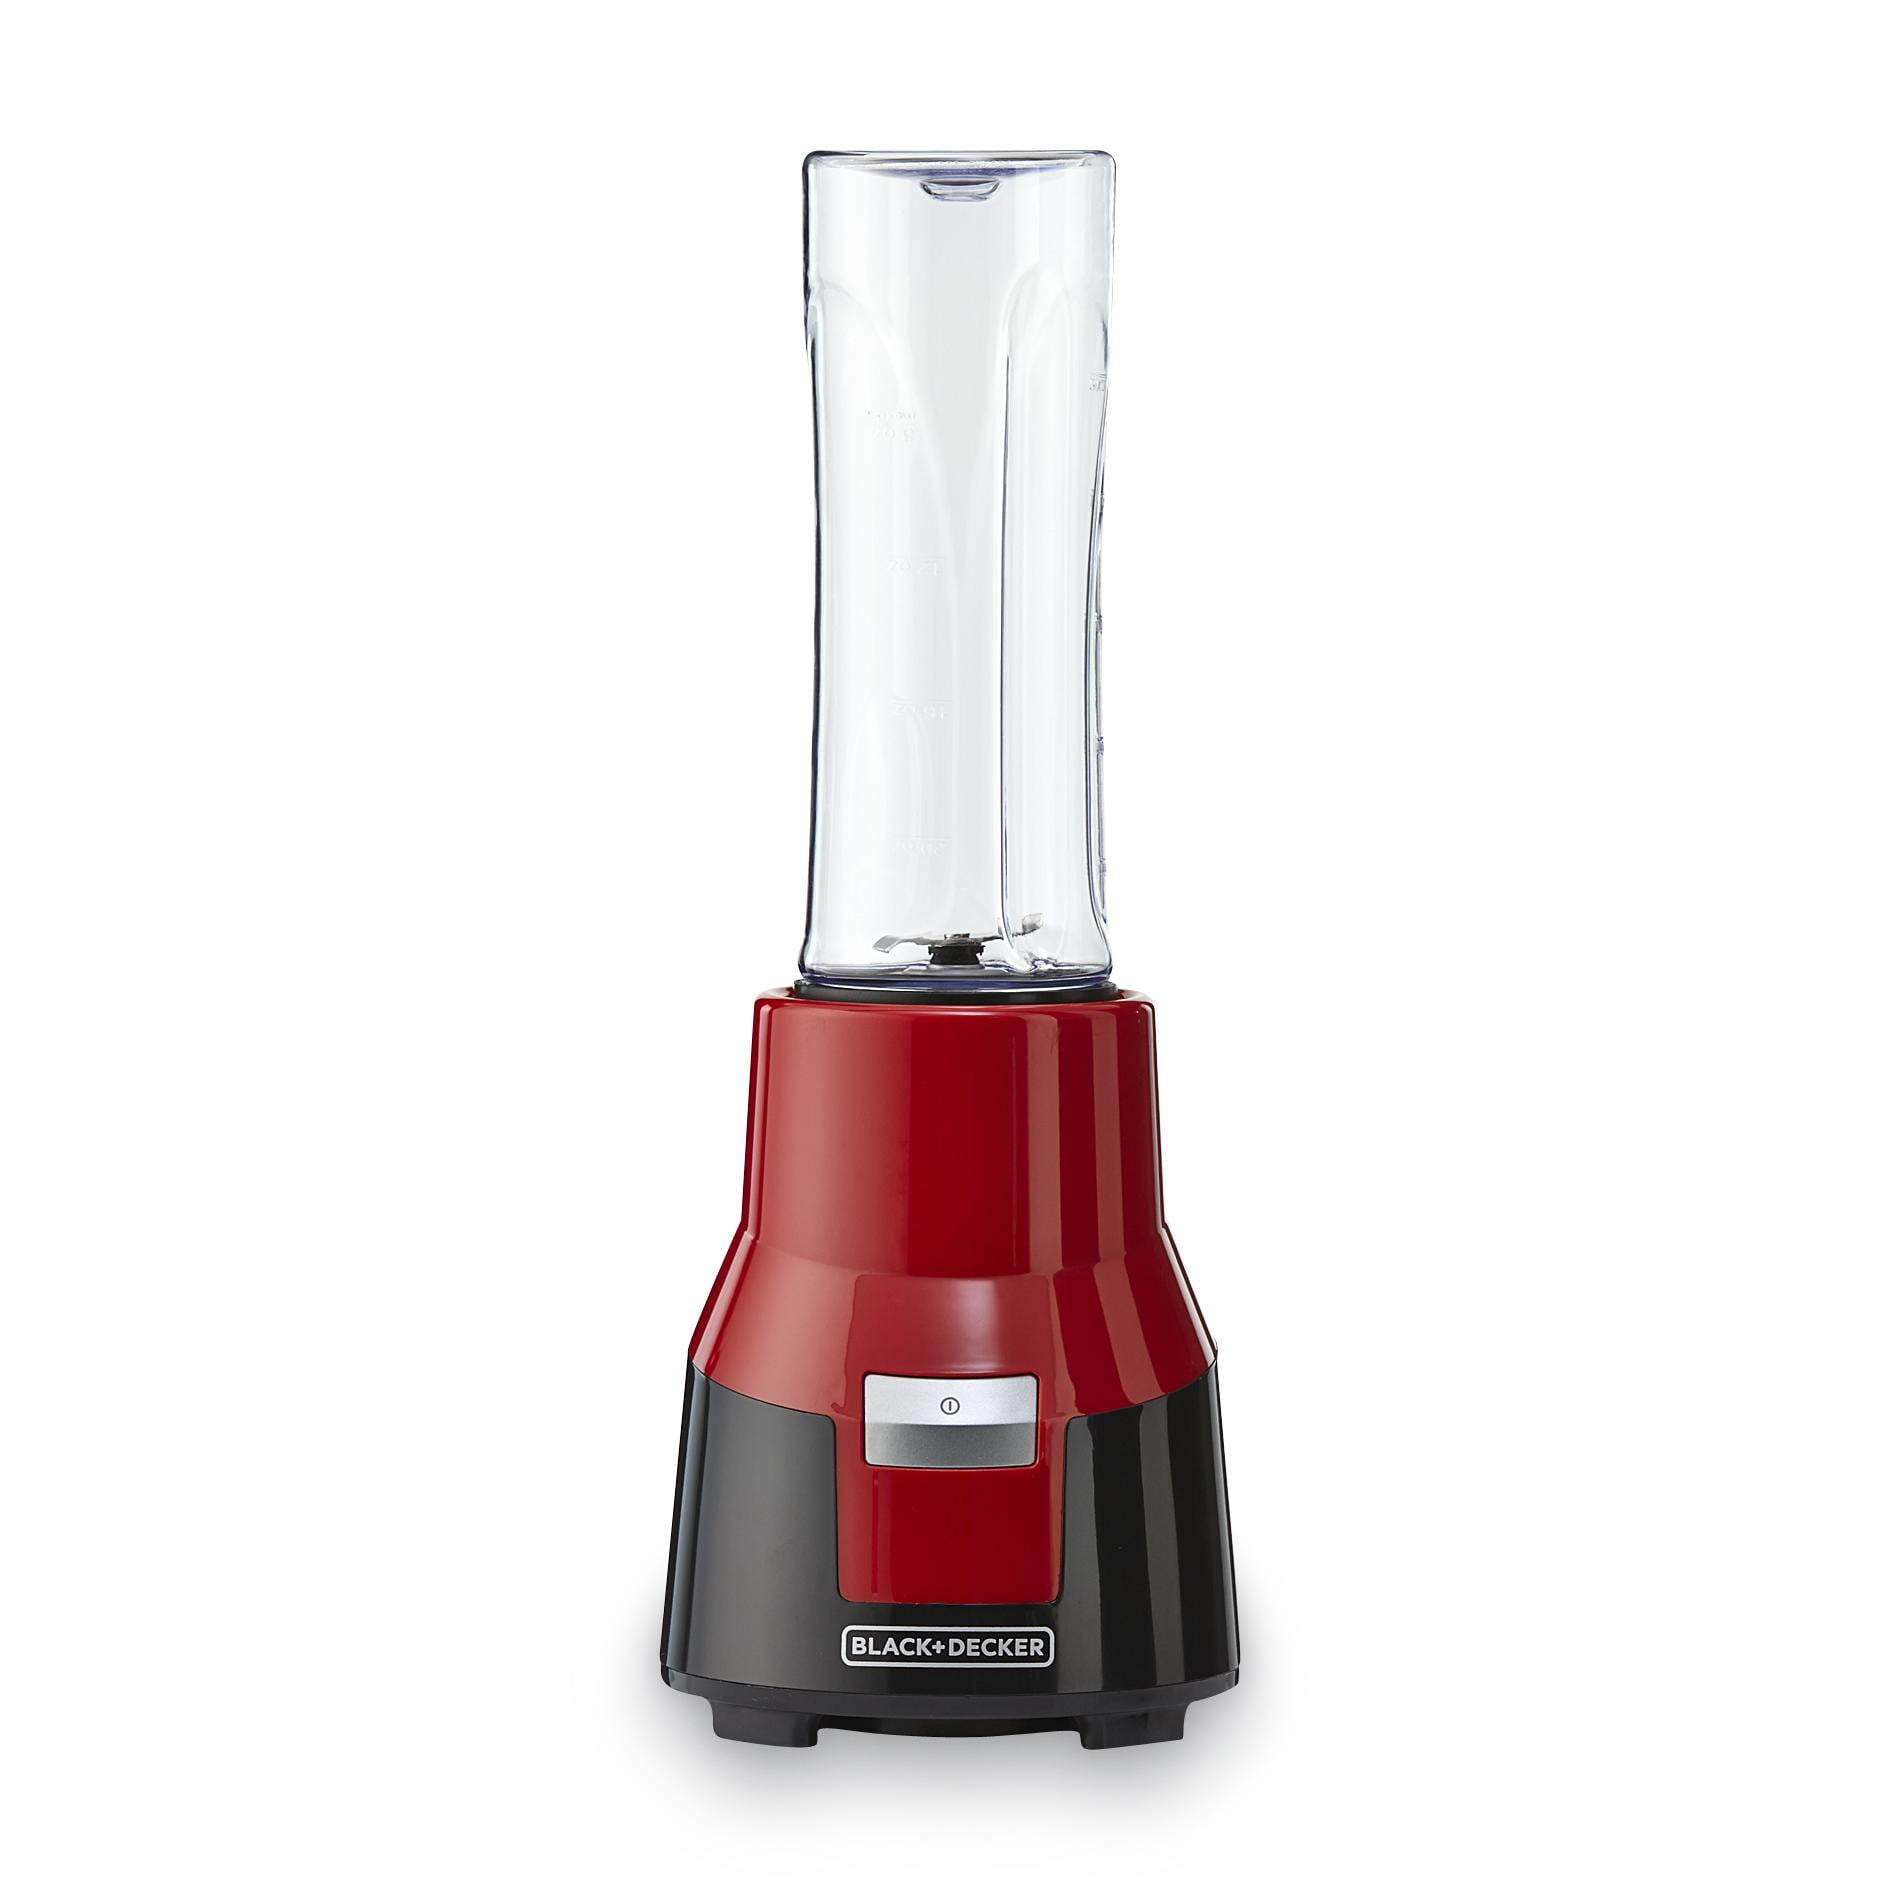  BLACK+DECKER FusionBlade Personal Blender with Two 20oz  Personal Blending Jars, Red, PB1002R: Home & Kitchen